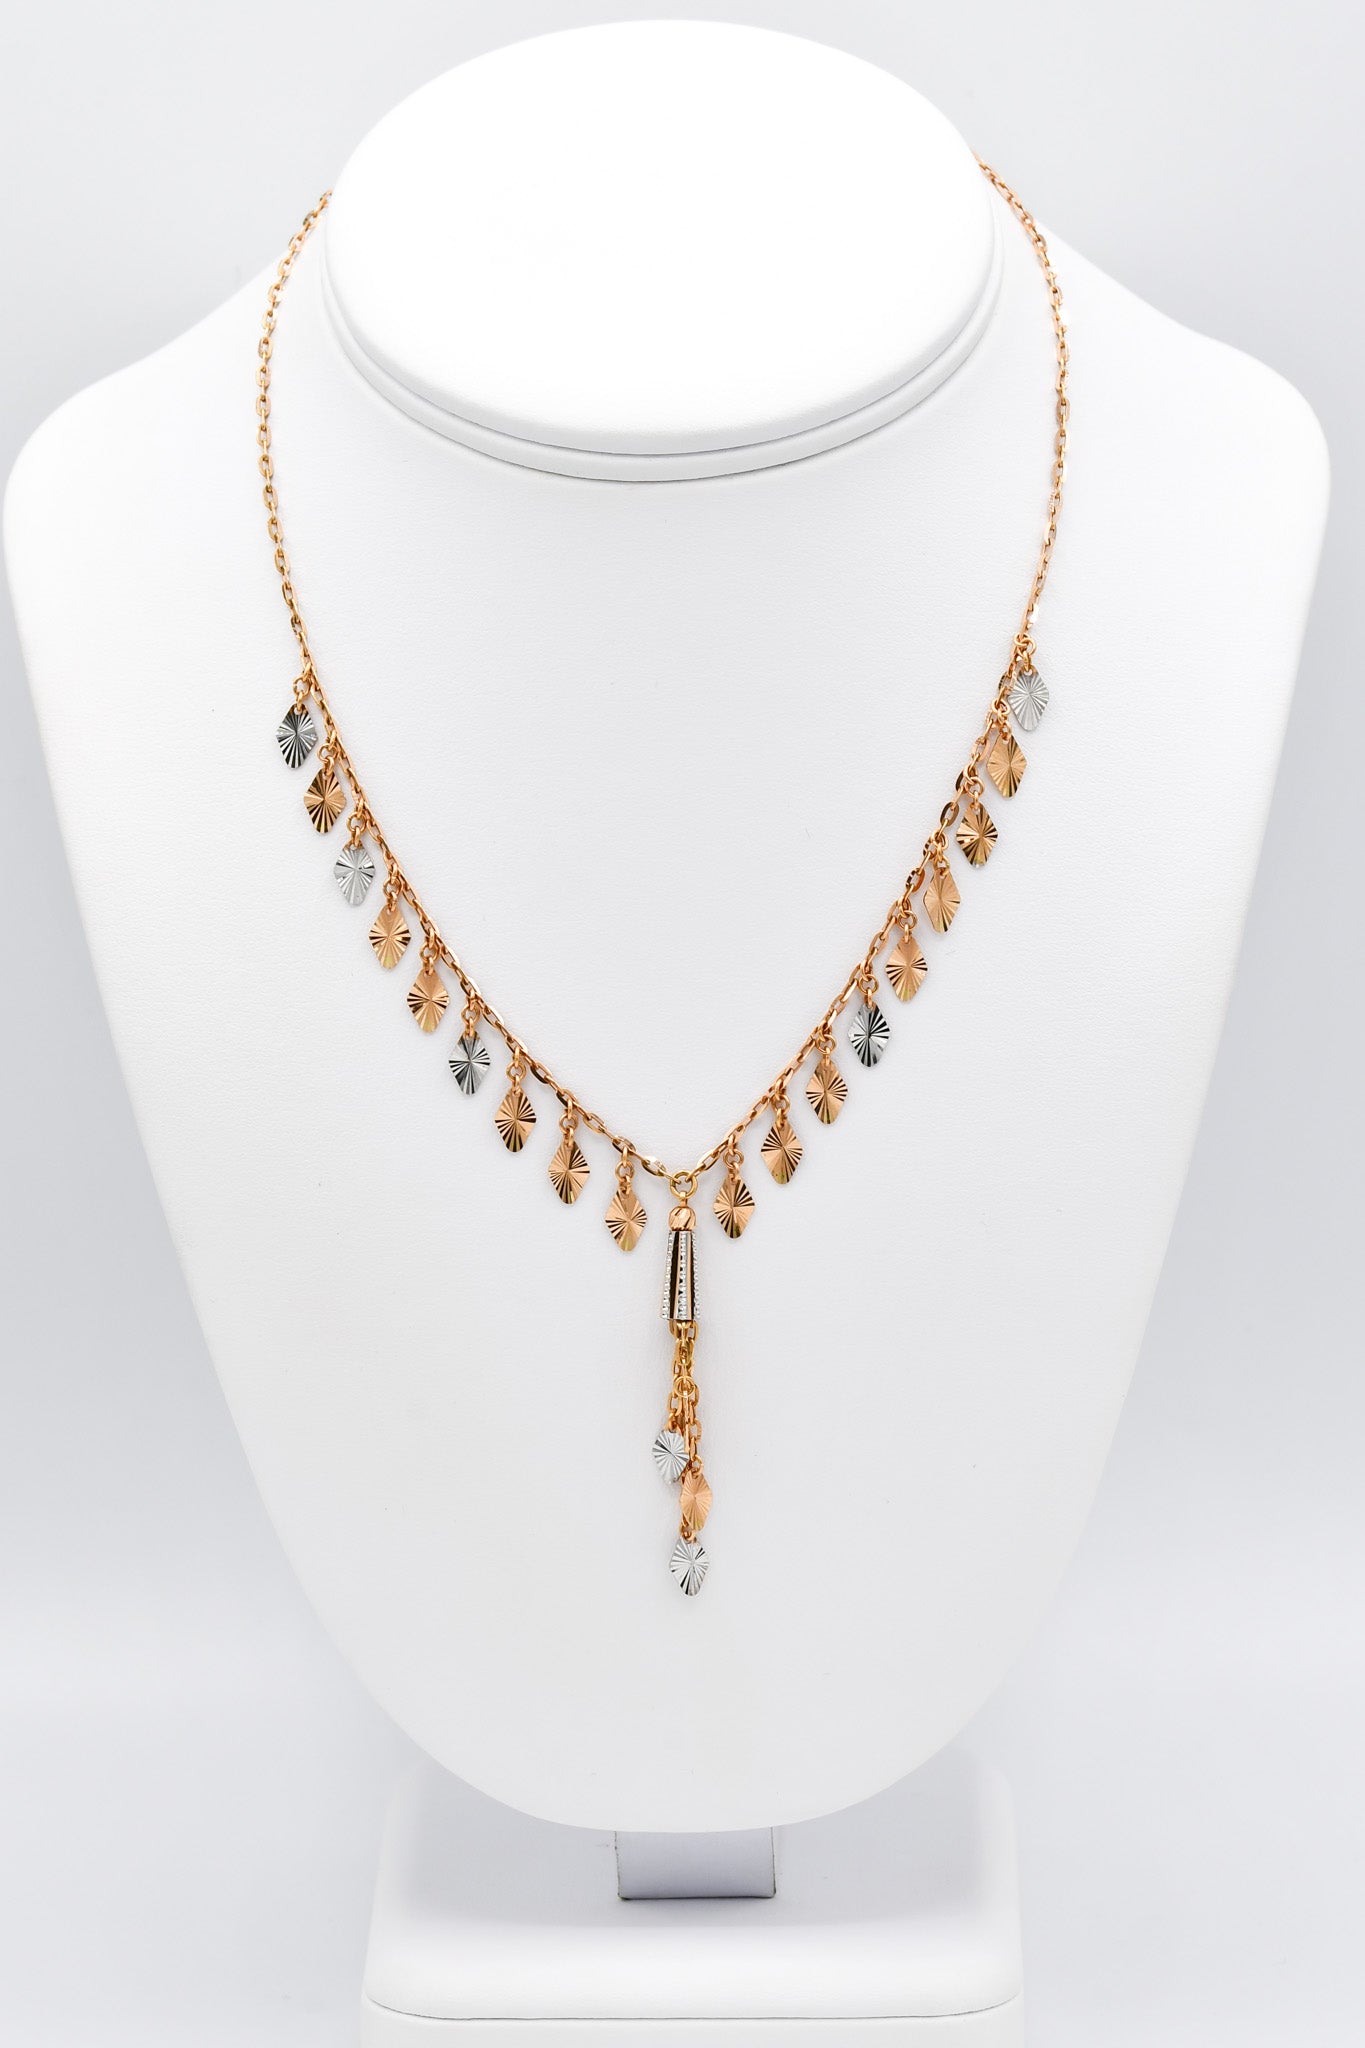 18ct Rose Gold Two Tone Necklace Set - Roop Darshan